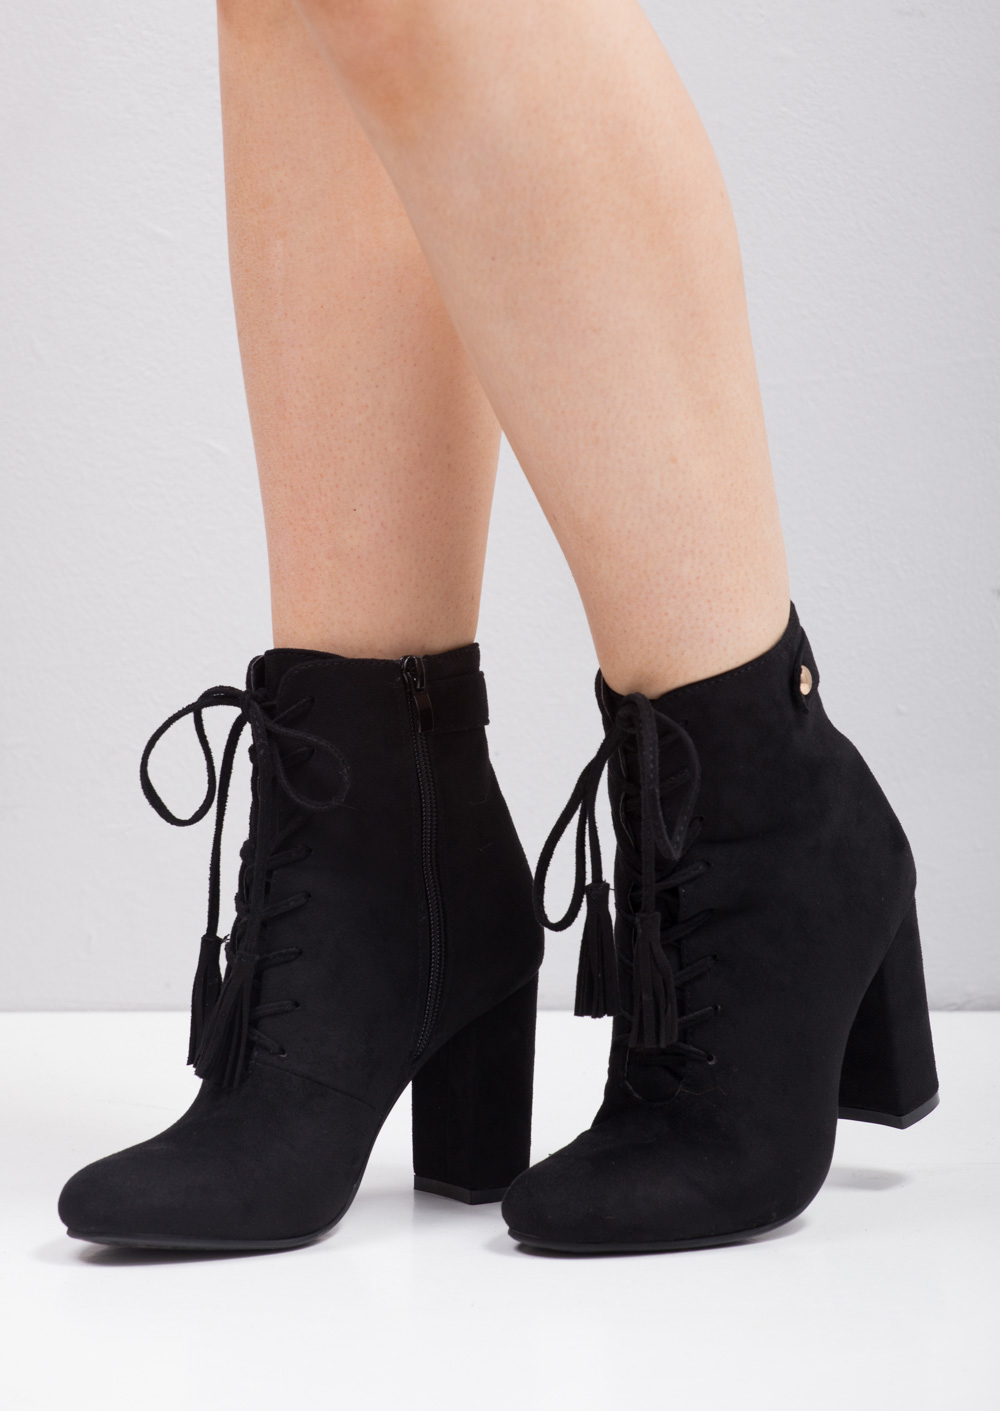 zip up heeled boots with lace